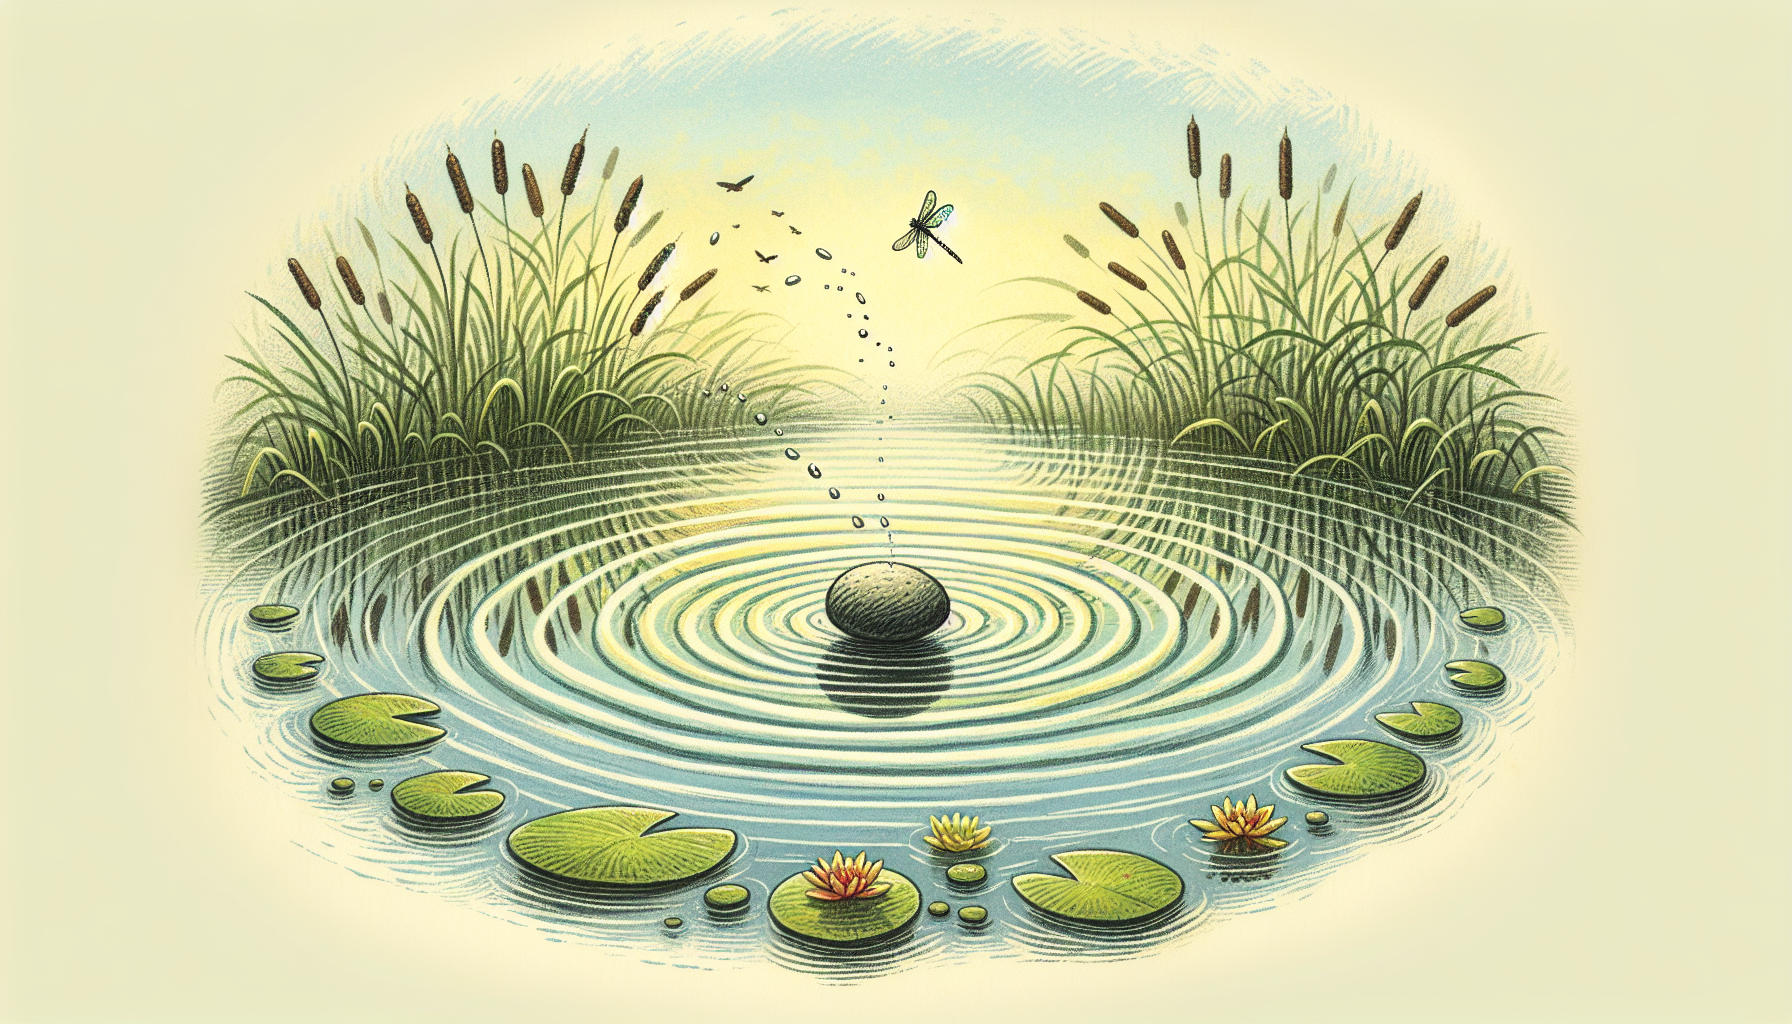 Illustration of a single thought causing ripples in a pond